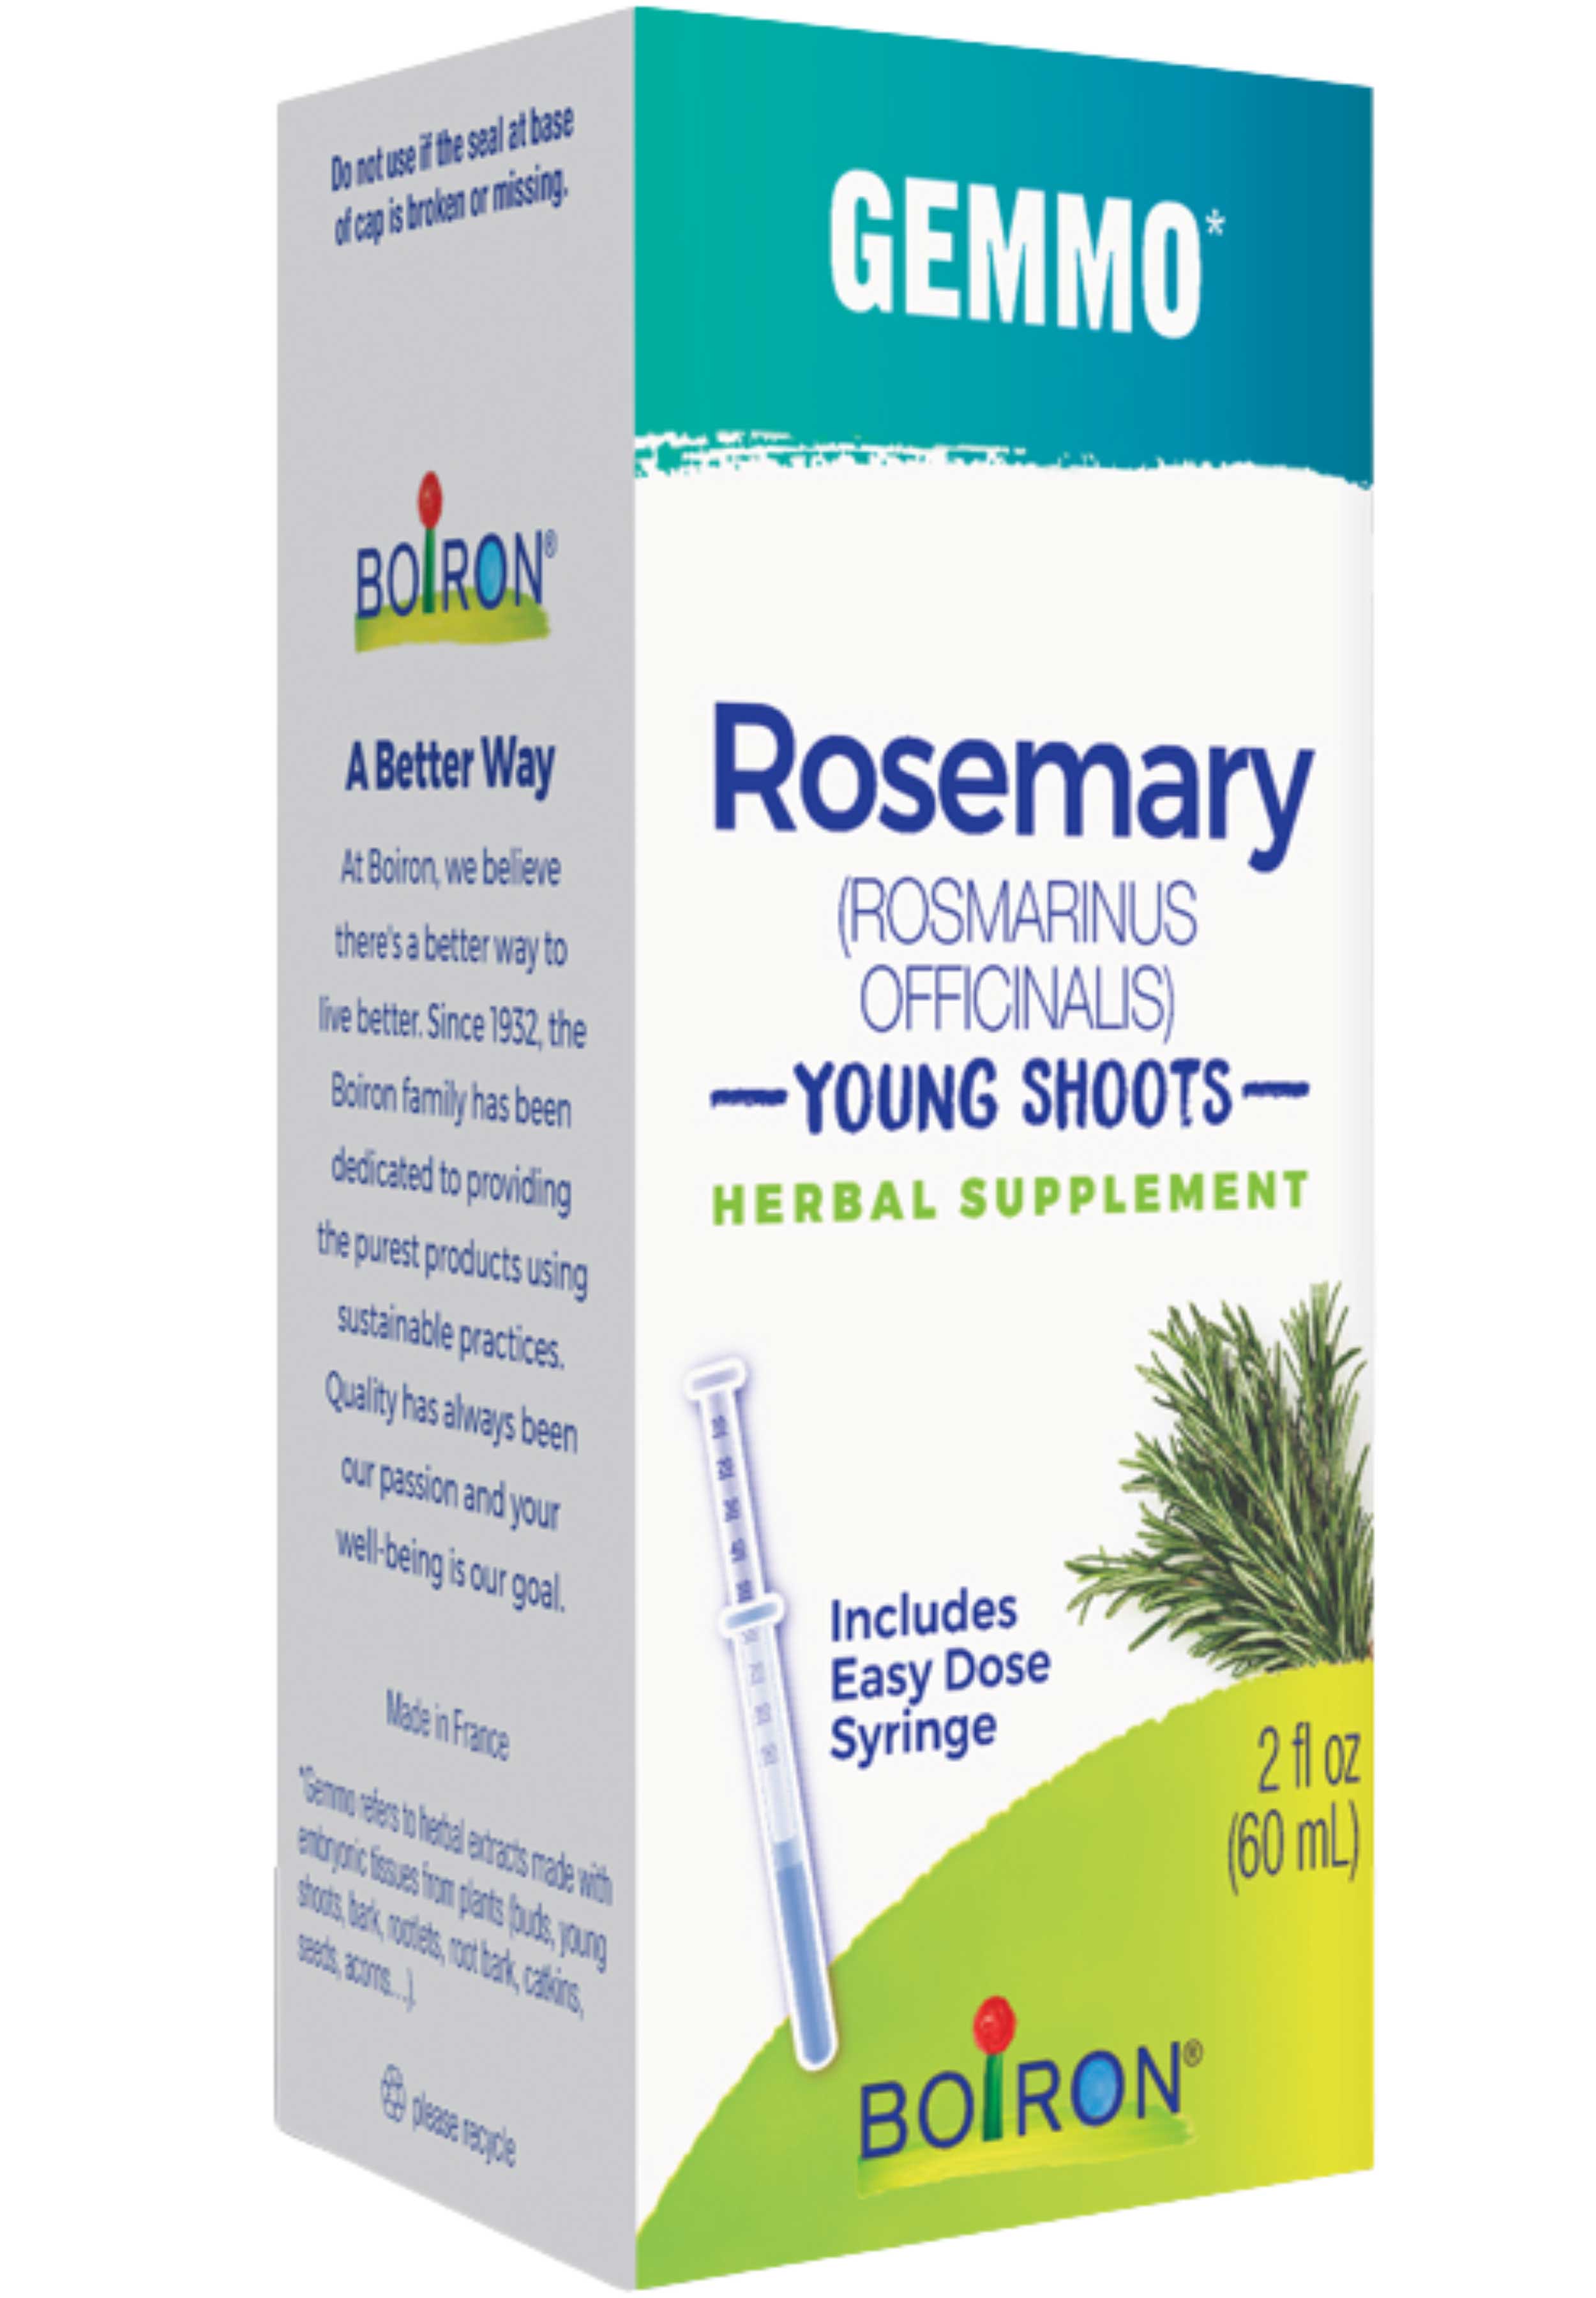 Boiron Homeopathics Gemmo Rosemary Young Shoots